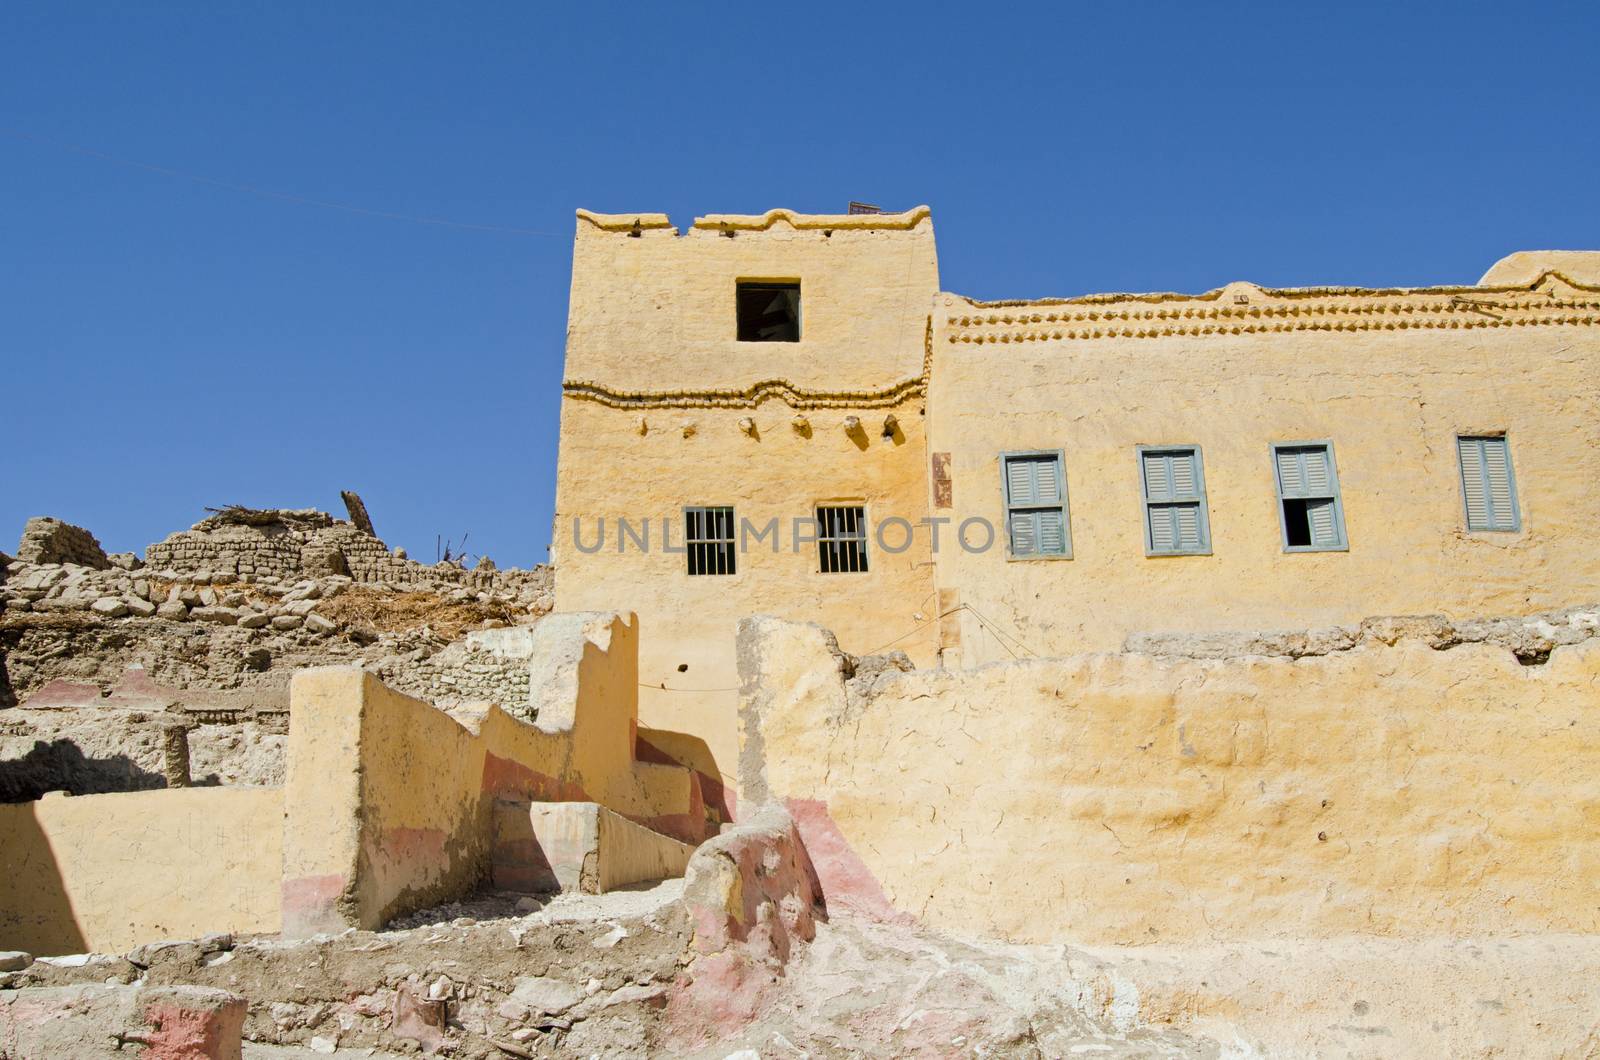 A traditional mud brick home painted yellow with some elegant detail in the village of Qurnet Murai.  The house is one of many built over the top of Ancient Egyptian tombs on the West Bank of the Nile in Luxor, Egypt.